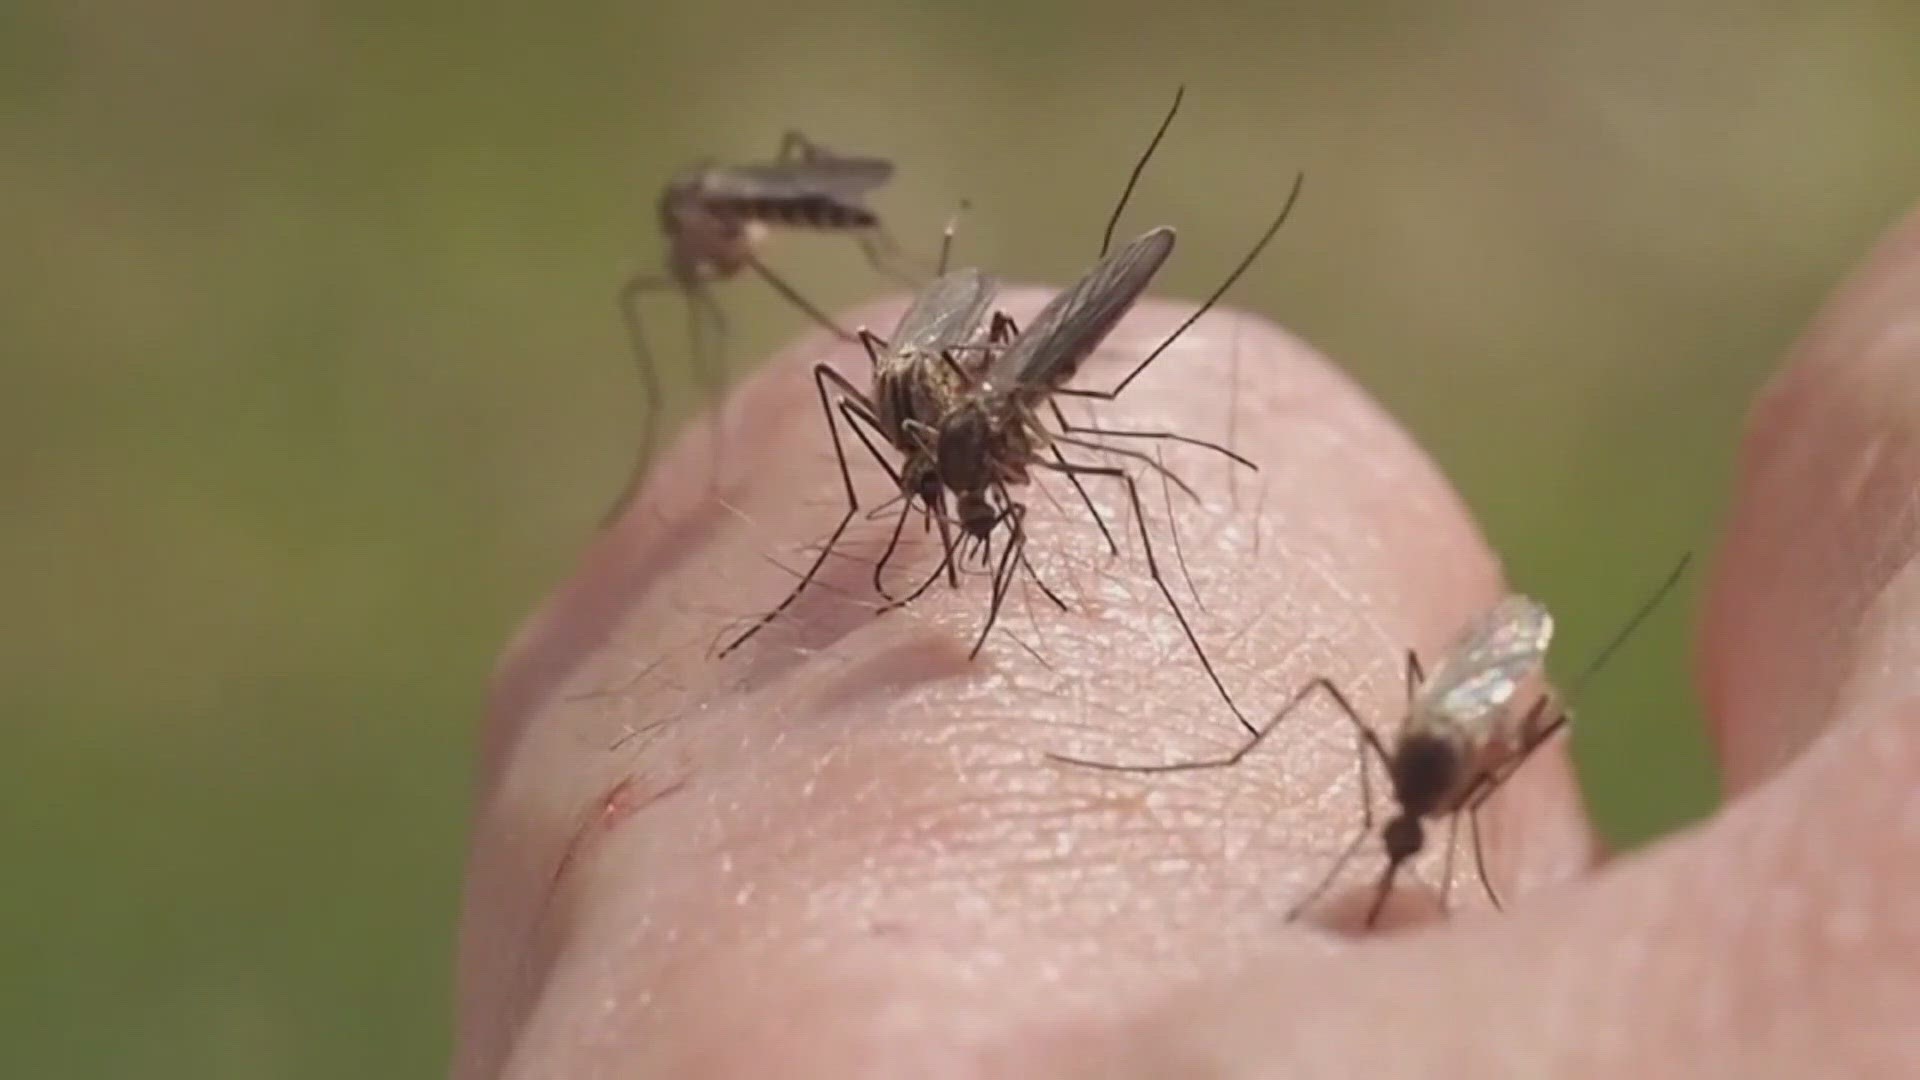 Lots of counties are worried how this could lead to West Nile virus cases.